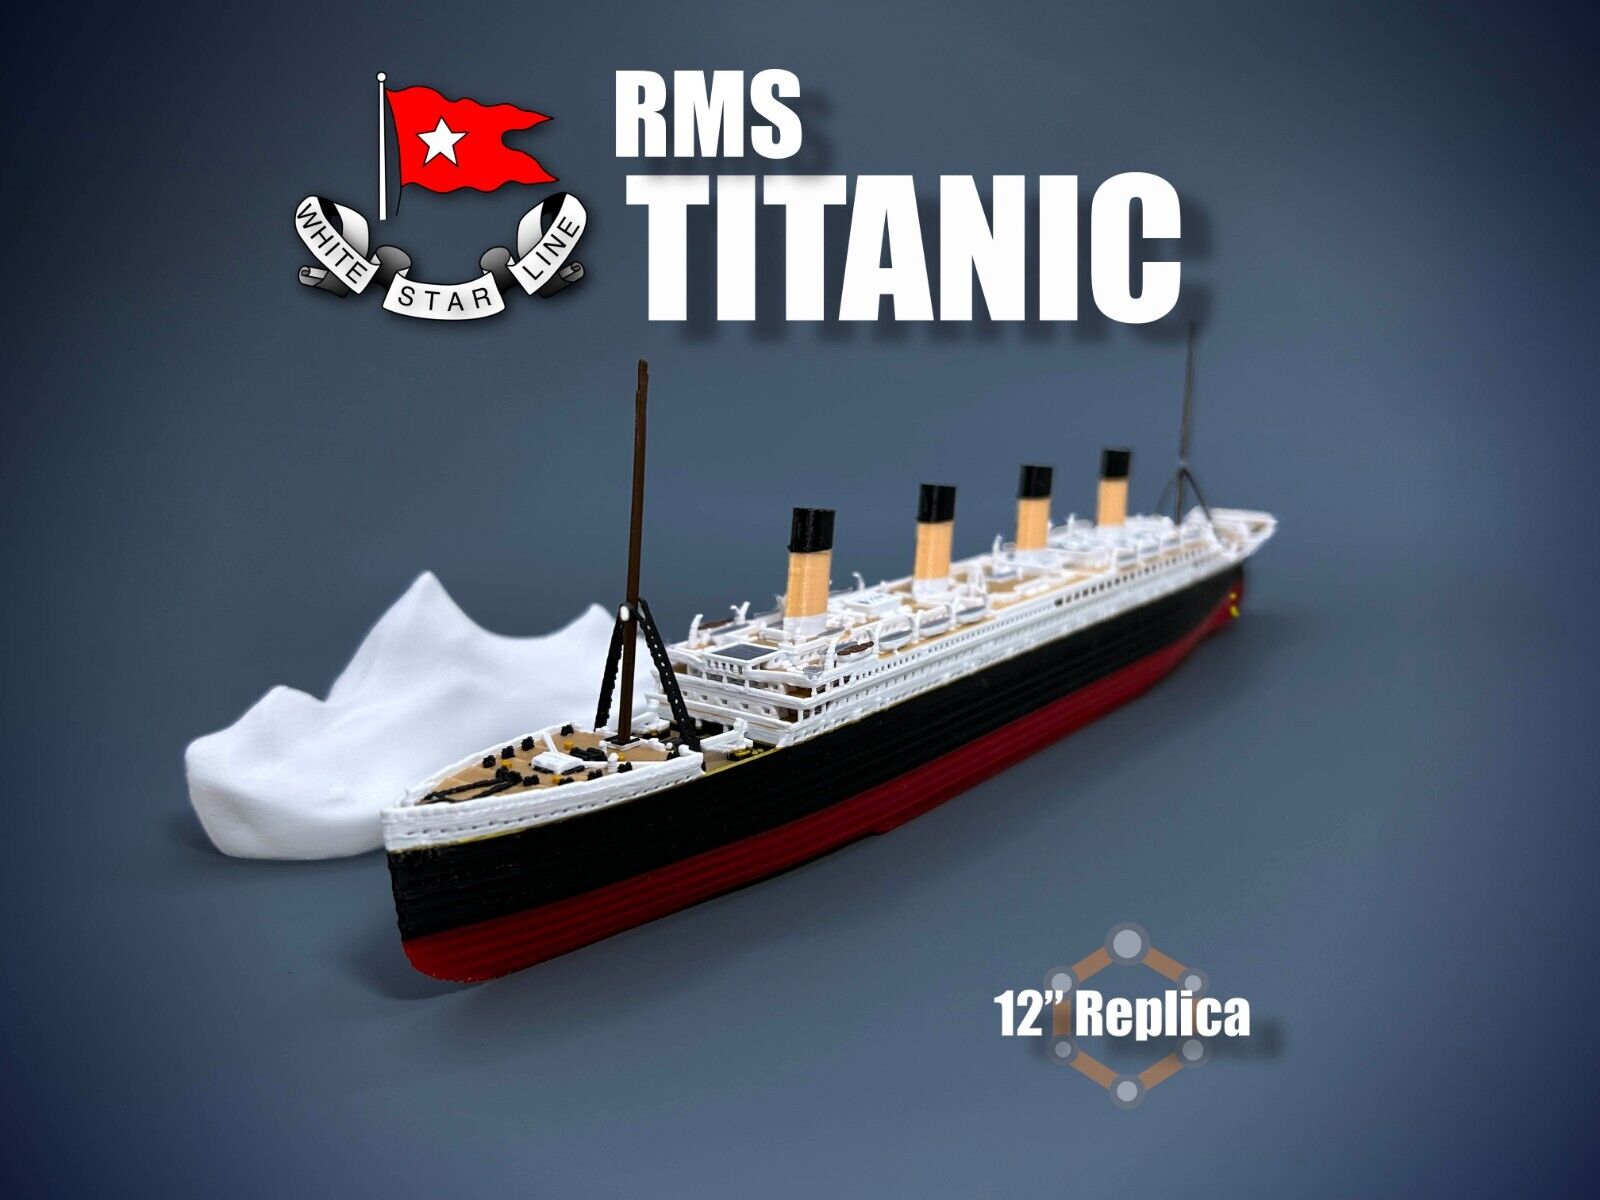 12” RMS Titanic Replica With Iceberg Very Detailed, High Quality Model Ship